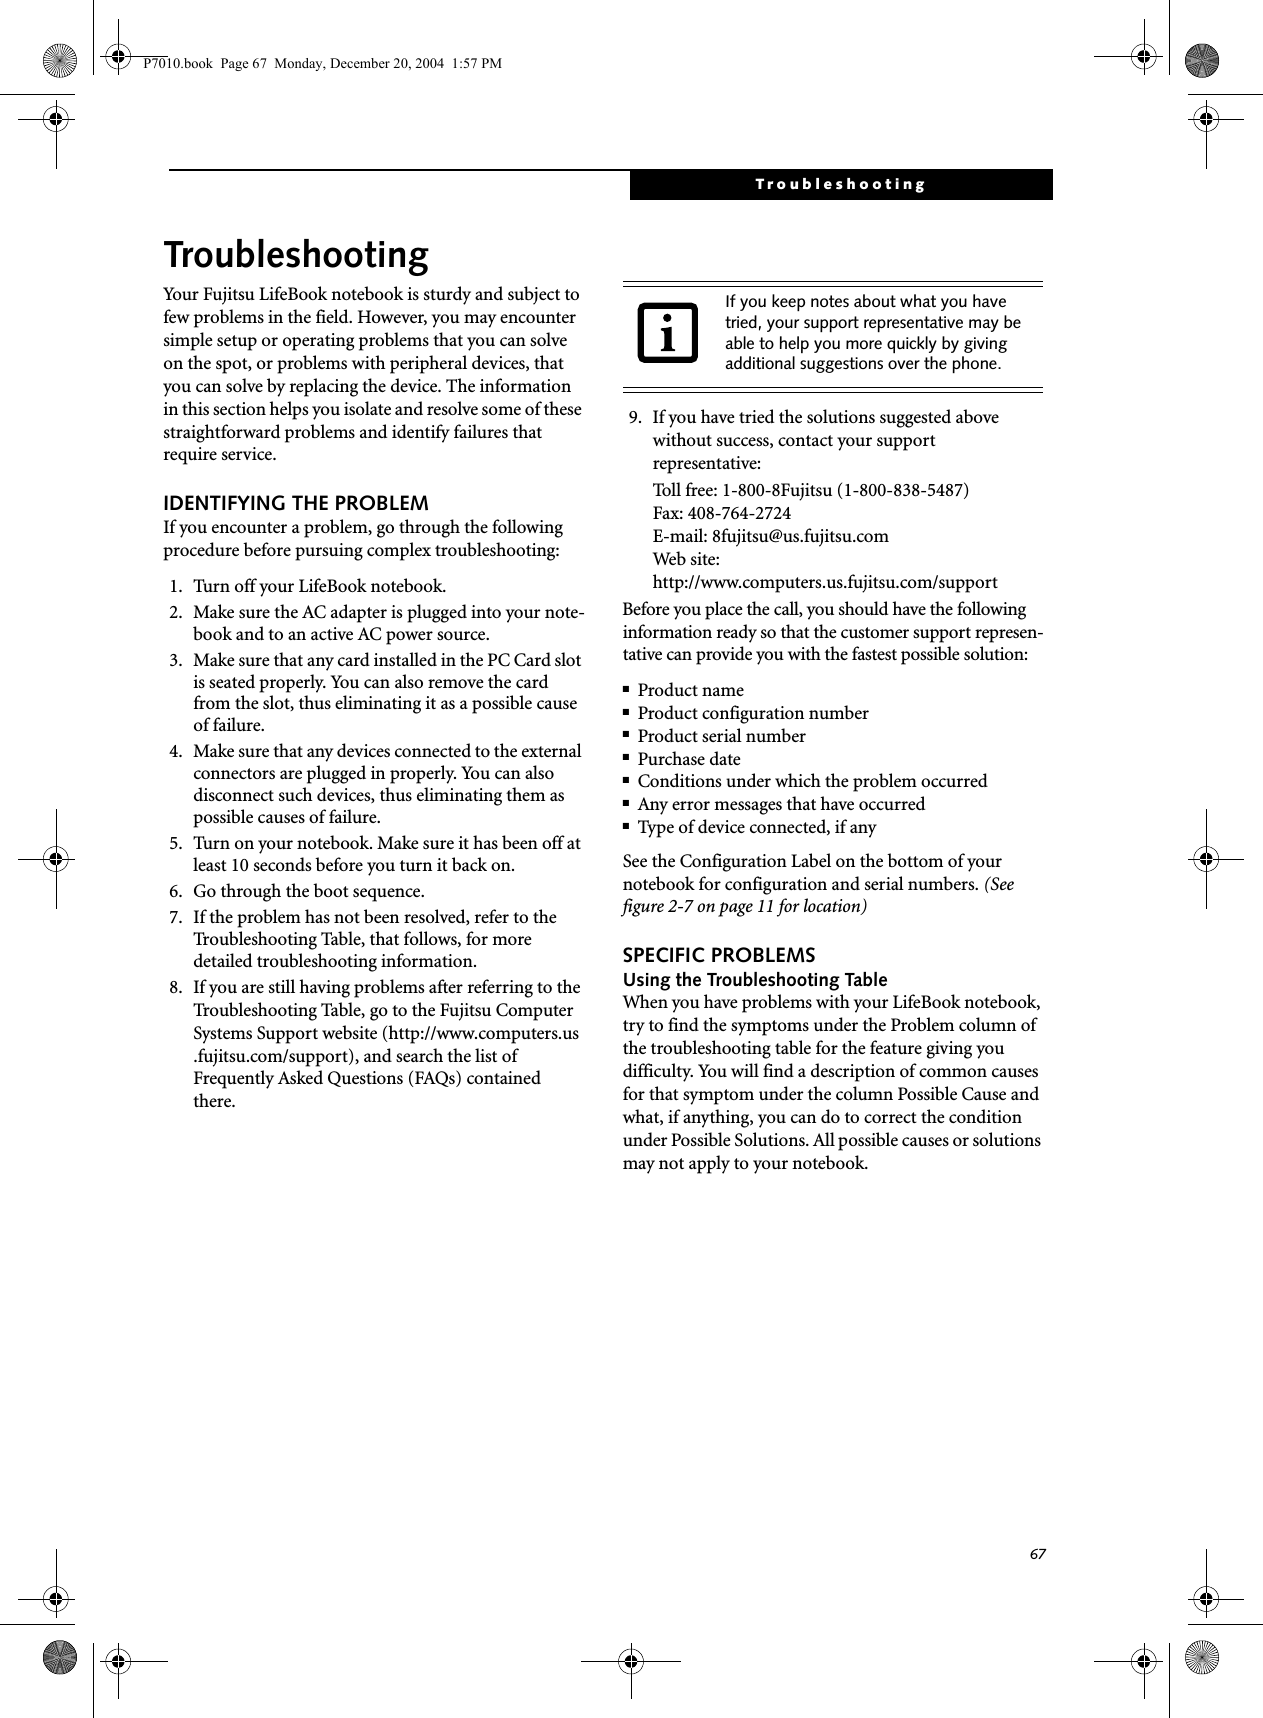 67TroubleshootingTroubleshootingYour Fujitsu LifeBook notebook is sturdy and subject to few problems in the field. However, you may encounter simple setup or operating problems that you can solve on the spot, or problems with peripheral devices, that you can solve by replacing the device. The information in this section helps you isolate and resolve some of these straightforward problems and identify failures that require service.IDENTIFYING THE PROBLEMIf you encounter a problem, go through the following procedure before pursuing complex troubleshooting:1. Turn off your LifeBook notebook.2. Make sure the AC adapter is plugged into your note-book and to an active AC power source.3. Make sure that any card installed in the PC Card slot is seated properly. You can also remove the card from the slot, thus eliminating it as a possible cause of failure.4. Make sure that any devices connected to the external connectors are plugged in properly. You can also disconnect such devices, thus eliminating them as possible causes of failure.5. Turn on your notebook. Make sure it has been off at least 10 seconds before you turn it back on.6. Go through the boot sequence.7. If the problem has not been resolved, refer to the Troubleshooting Table, that follows, for more detailed troubleshooting information. 8. If you are still having problems after referring to the Troubleshooting Table, go to the Fujitsu Computer Systems Support website (http://www.computers.us.fujitsu.com/support), and search the list of Frequently Asked Questions (FAQs) contained there. 9. If you have tried the solutions suggested above without success, contact your support representative: Toll free: 1-800-8Fujitsu (1-800-838-5487) Fax: 408-764-2724 E-mail: 8fujitsu@us.fujitsu.com Web site: http://www.computers.us.fujitsu.com/supportBefore you place the call, you should have the following information ready so that the customer support represen-tative can provide you with the fastest possible solution:■Product name■Product configuration number■Product serial number■Purchase date■Conditions under which the problem occurred■Any error messages that have occurred■Type of device connected, if anySee the Configuration Label on the bottom of yournotebook for configuration and serial numbers. (See figure 2-7 on page 11 for location)SPECIFIC PROBLEMSUsing the Troubleshooting TableWhen you have problems with your LifeBook notebook, try to find the symptoms under the Problem column of the troubleshooting table for the feature giving you difficulty. You will find a description of common causes for that symptom under the column Possible Cause and what, if anything, you can do to correct the condition under Possible Solutions. All possible causes or solutions may not apply to your notebook.If you keep notes about what you have tried, your support representative may be able to help you more quickly by giving additional suggestions over the phone.P7010.book  Page 67  Monday, December 20, 2004  1:57 PM